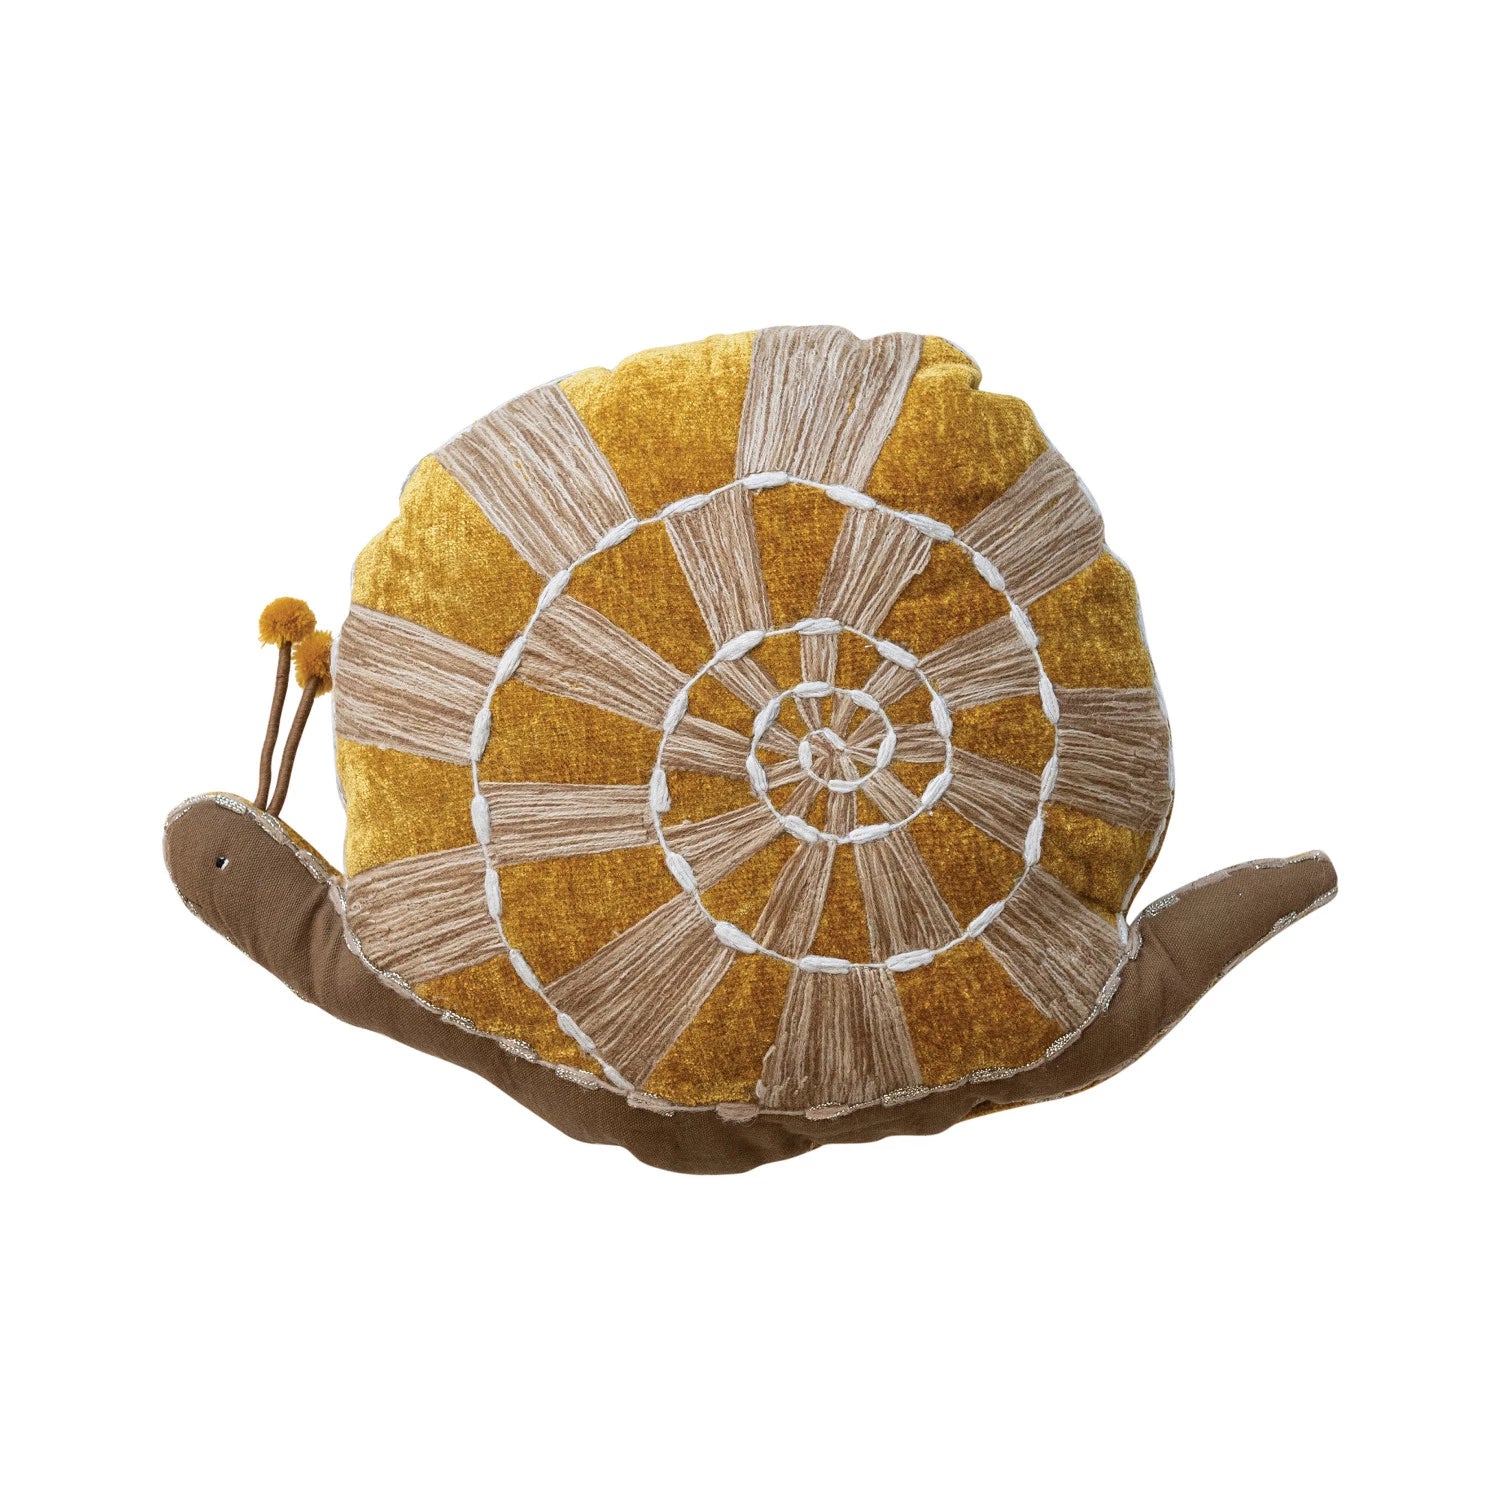 snail shaped pillow on a white background.